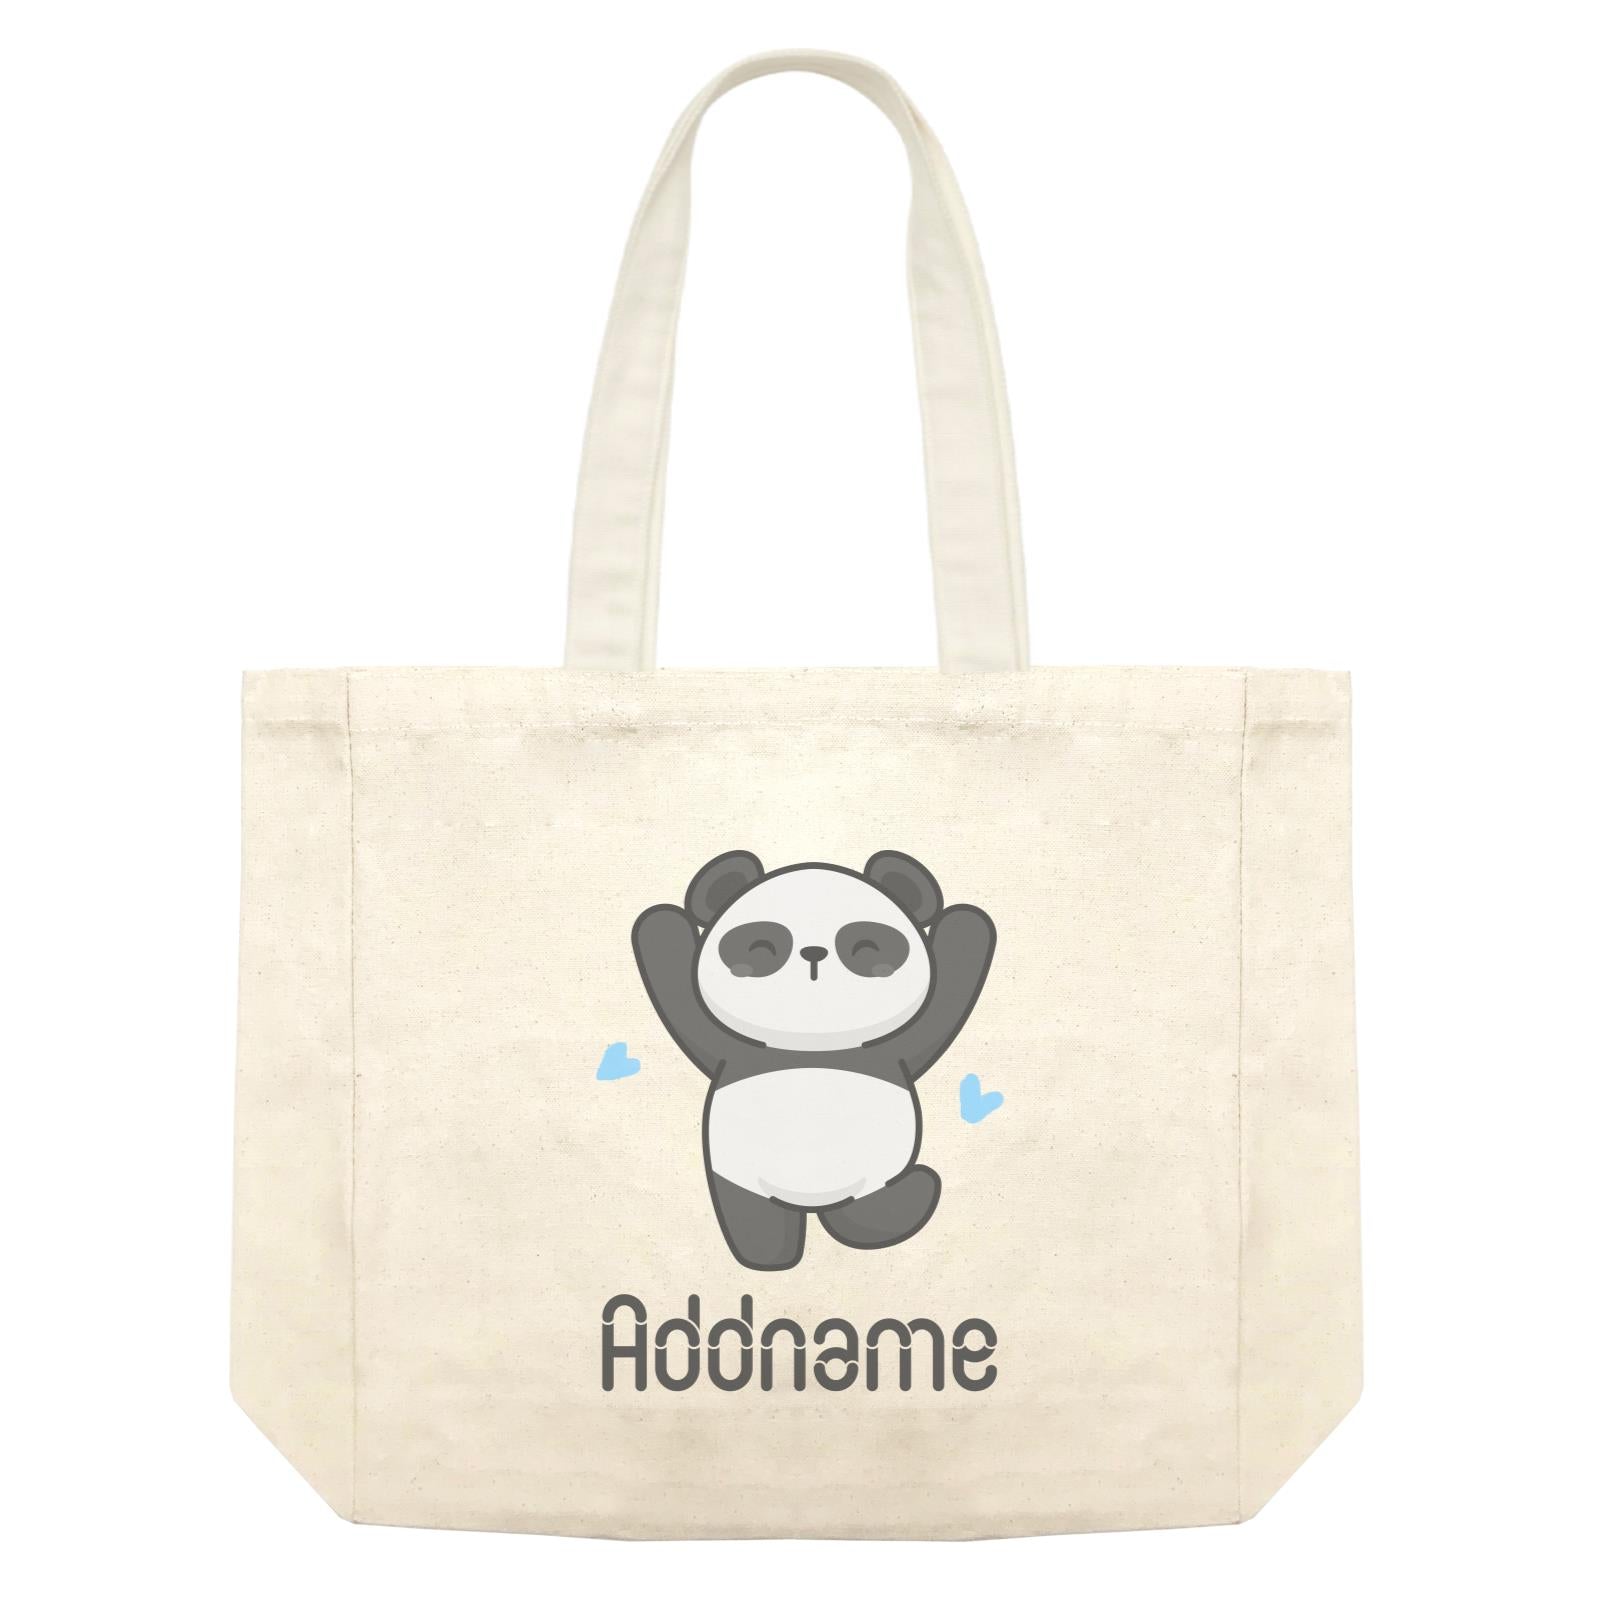 Cute Hand Drawn Style Panda Jumps with Joy Addname Shopping Bag